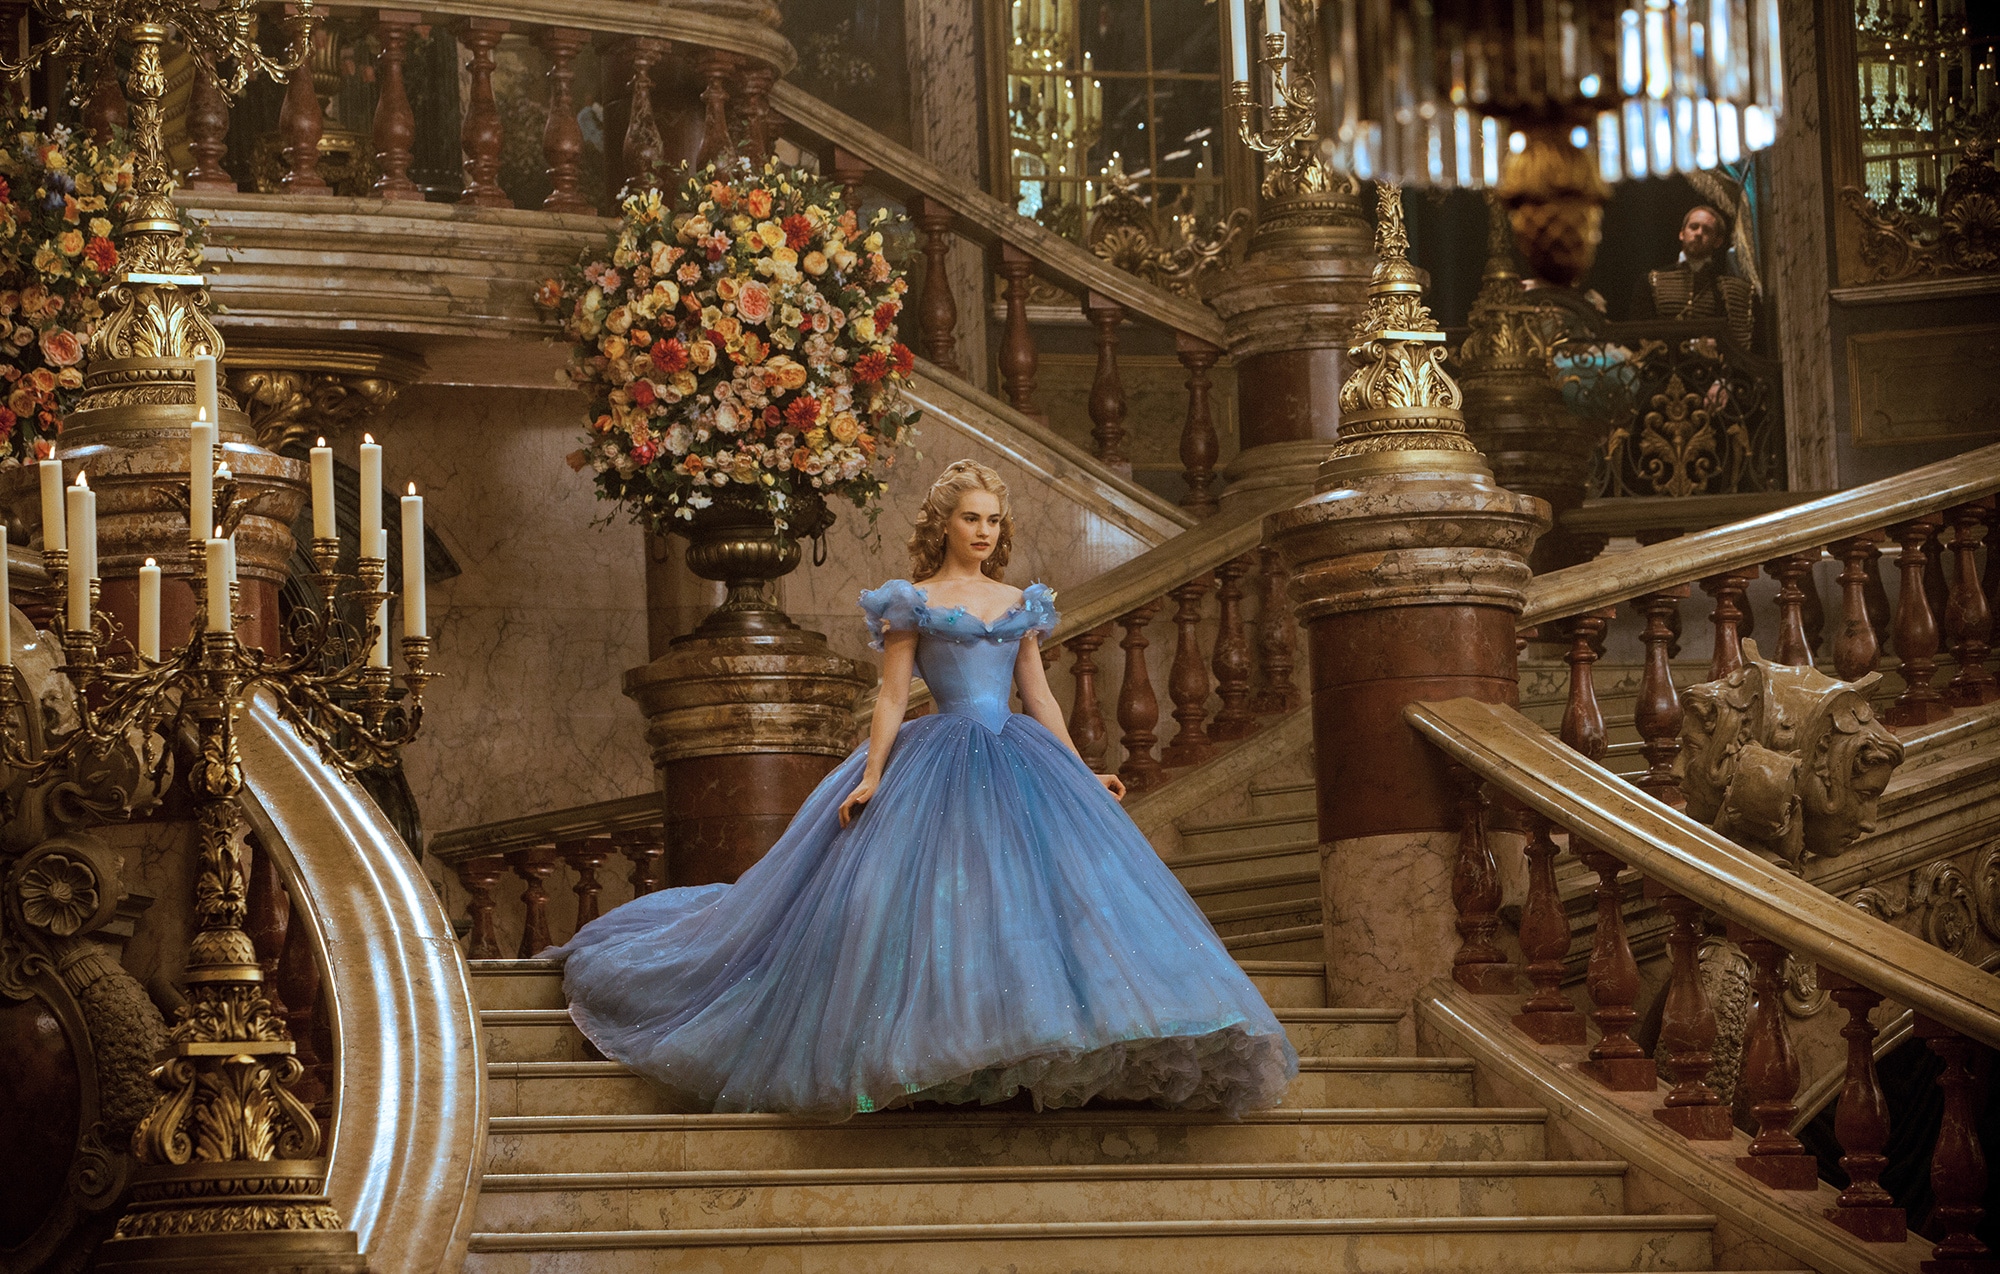 christina akey recommends cinderella movie free download pic